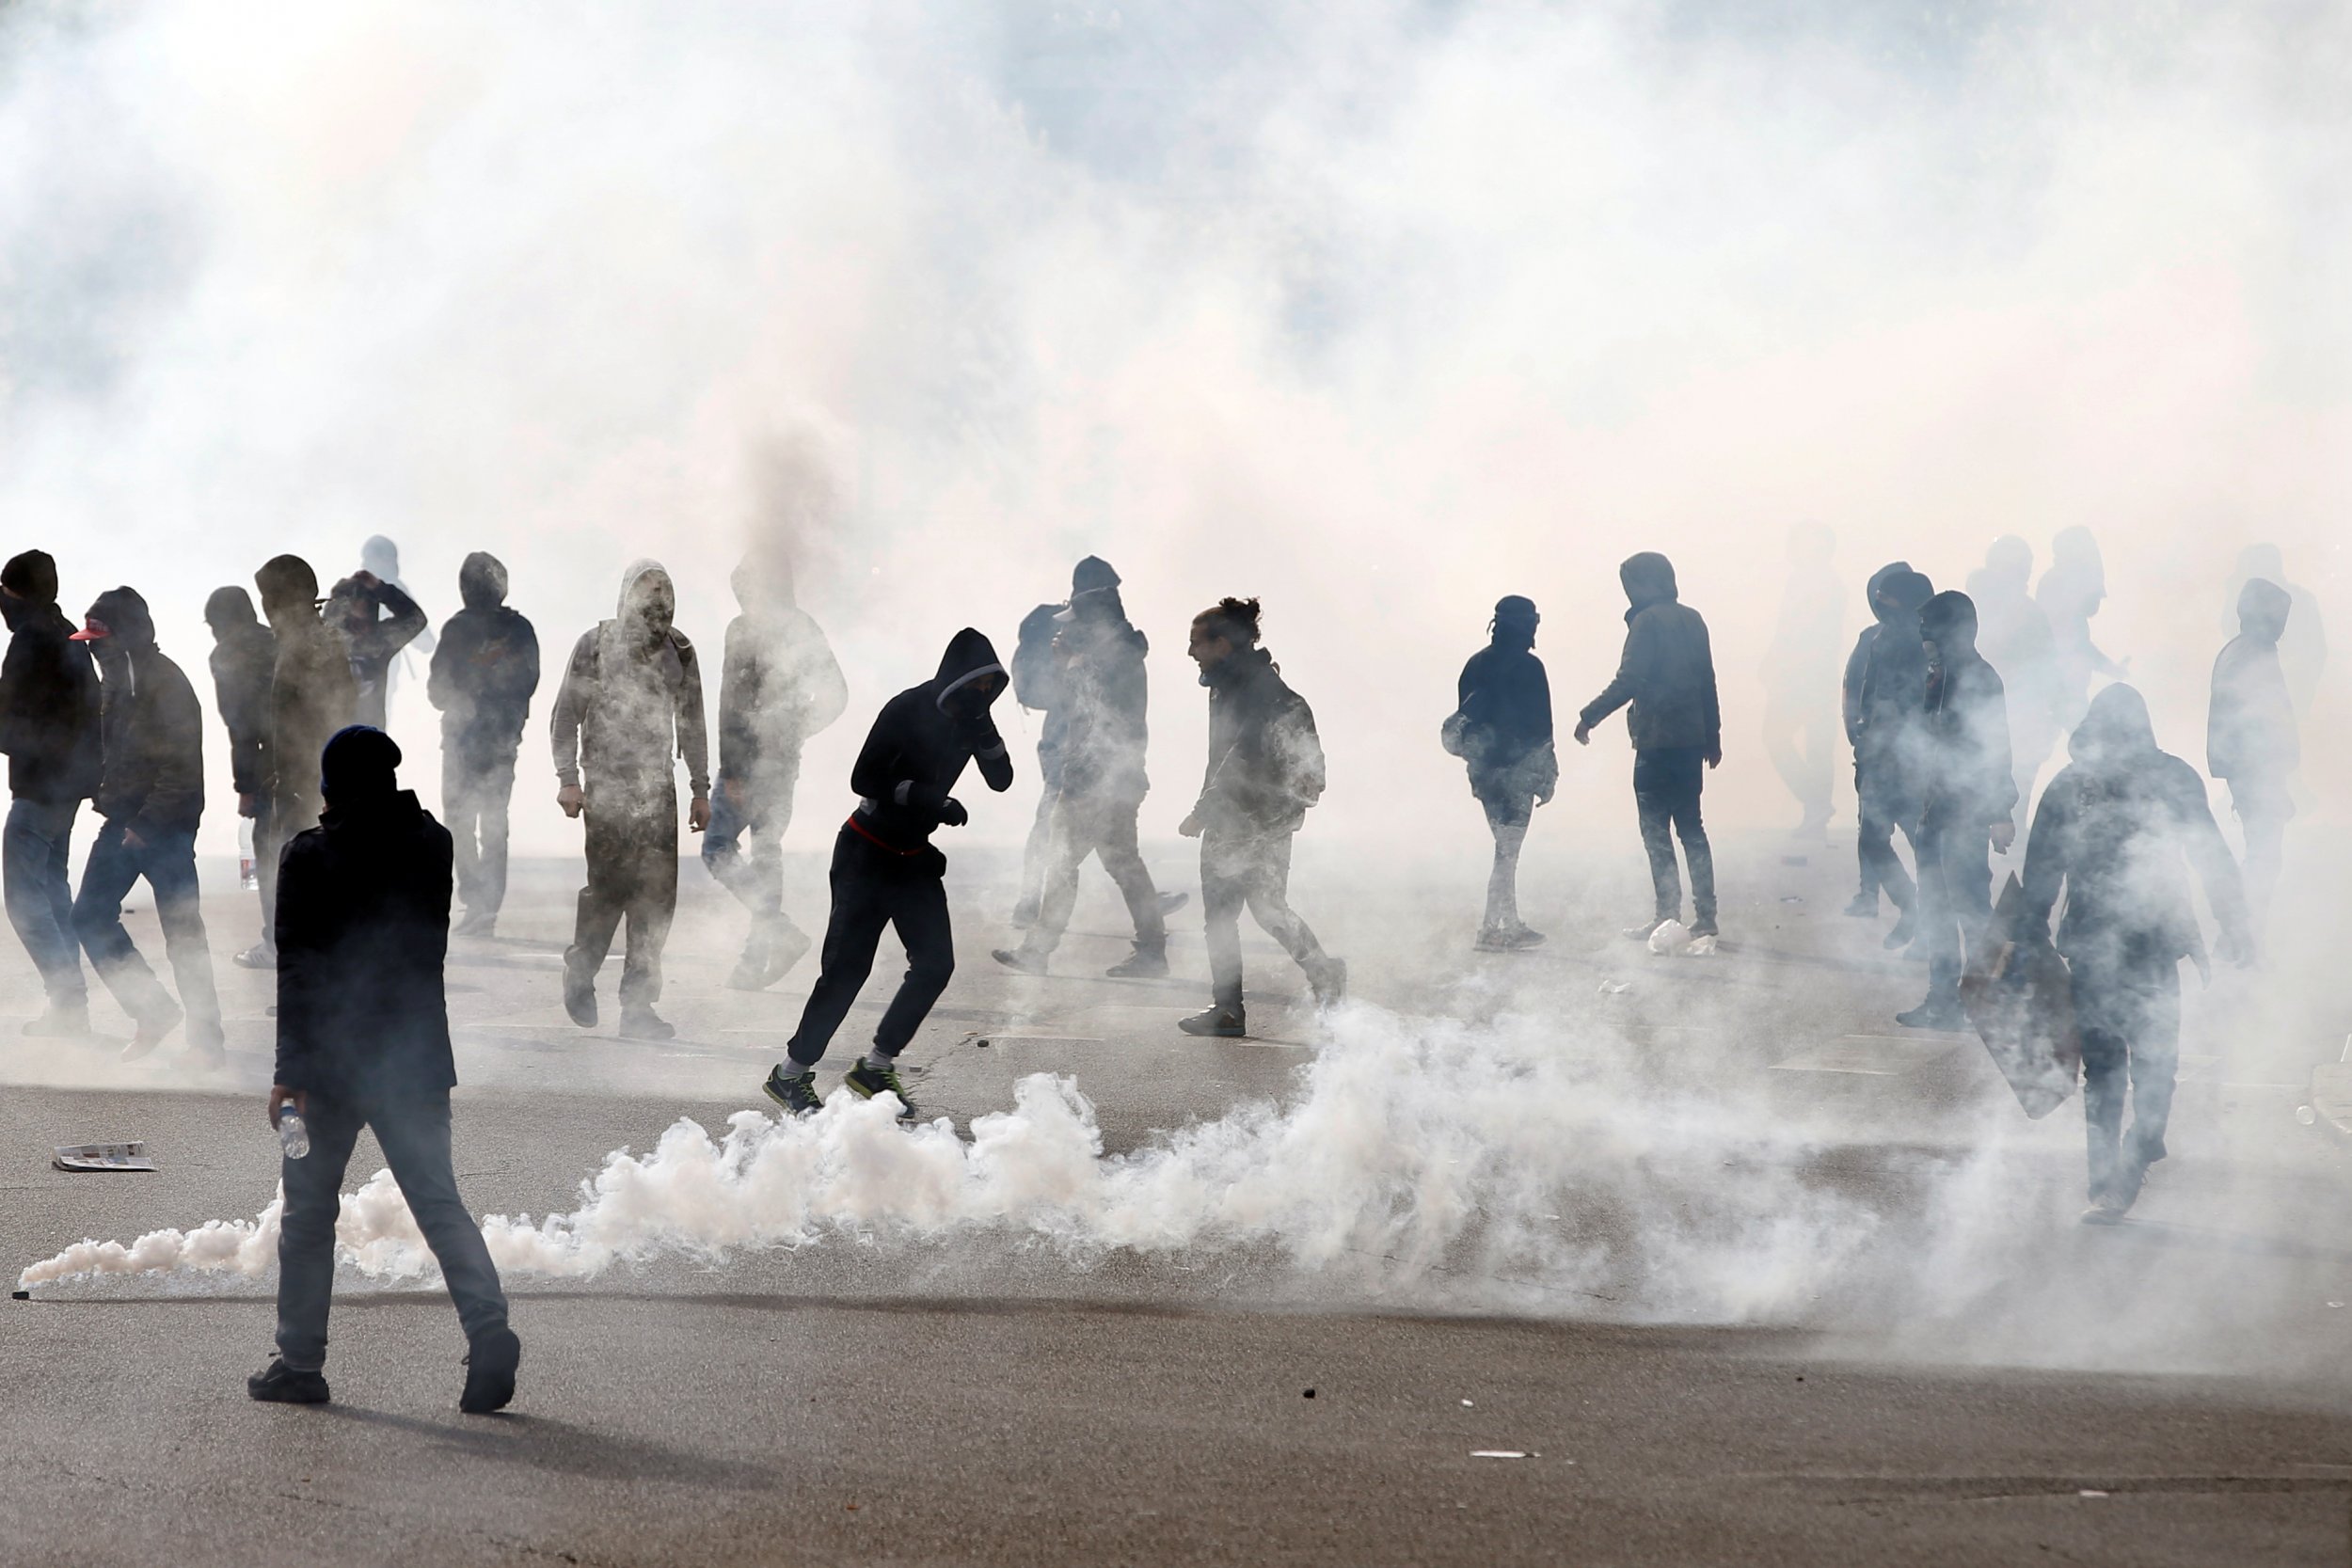 French Police Arrest 27 People After Overnight Rioting in Paris